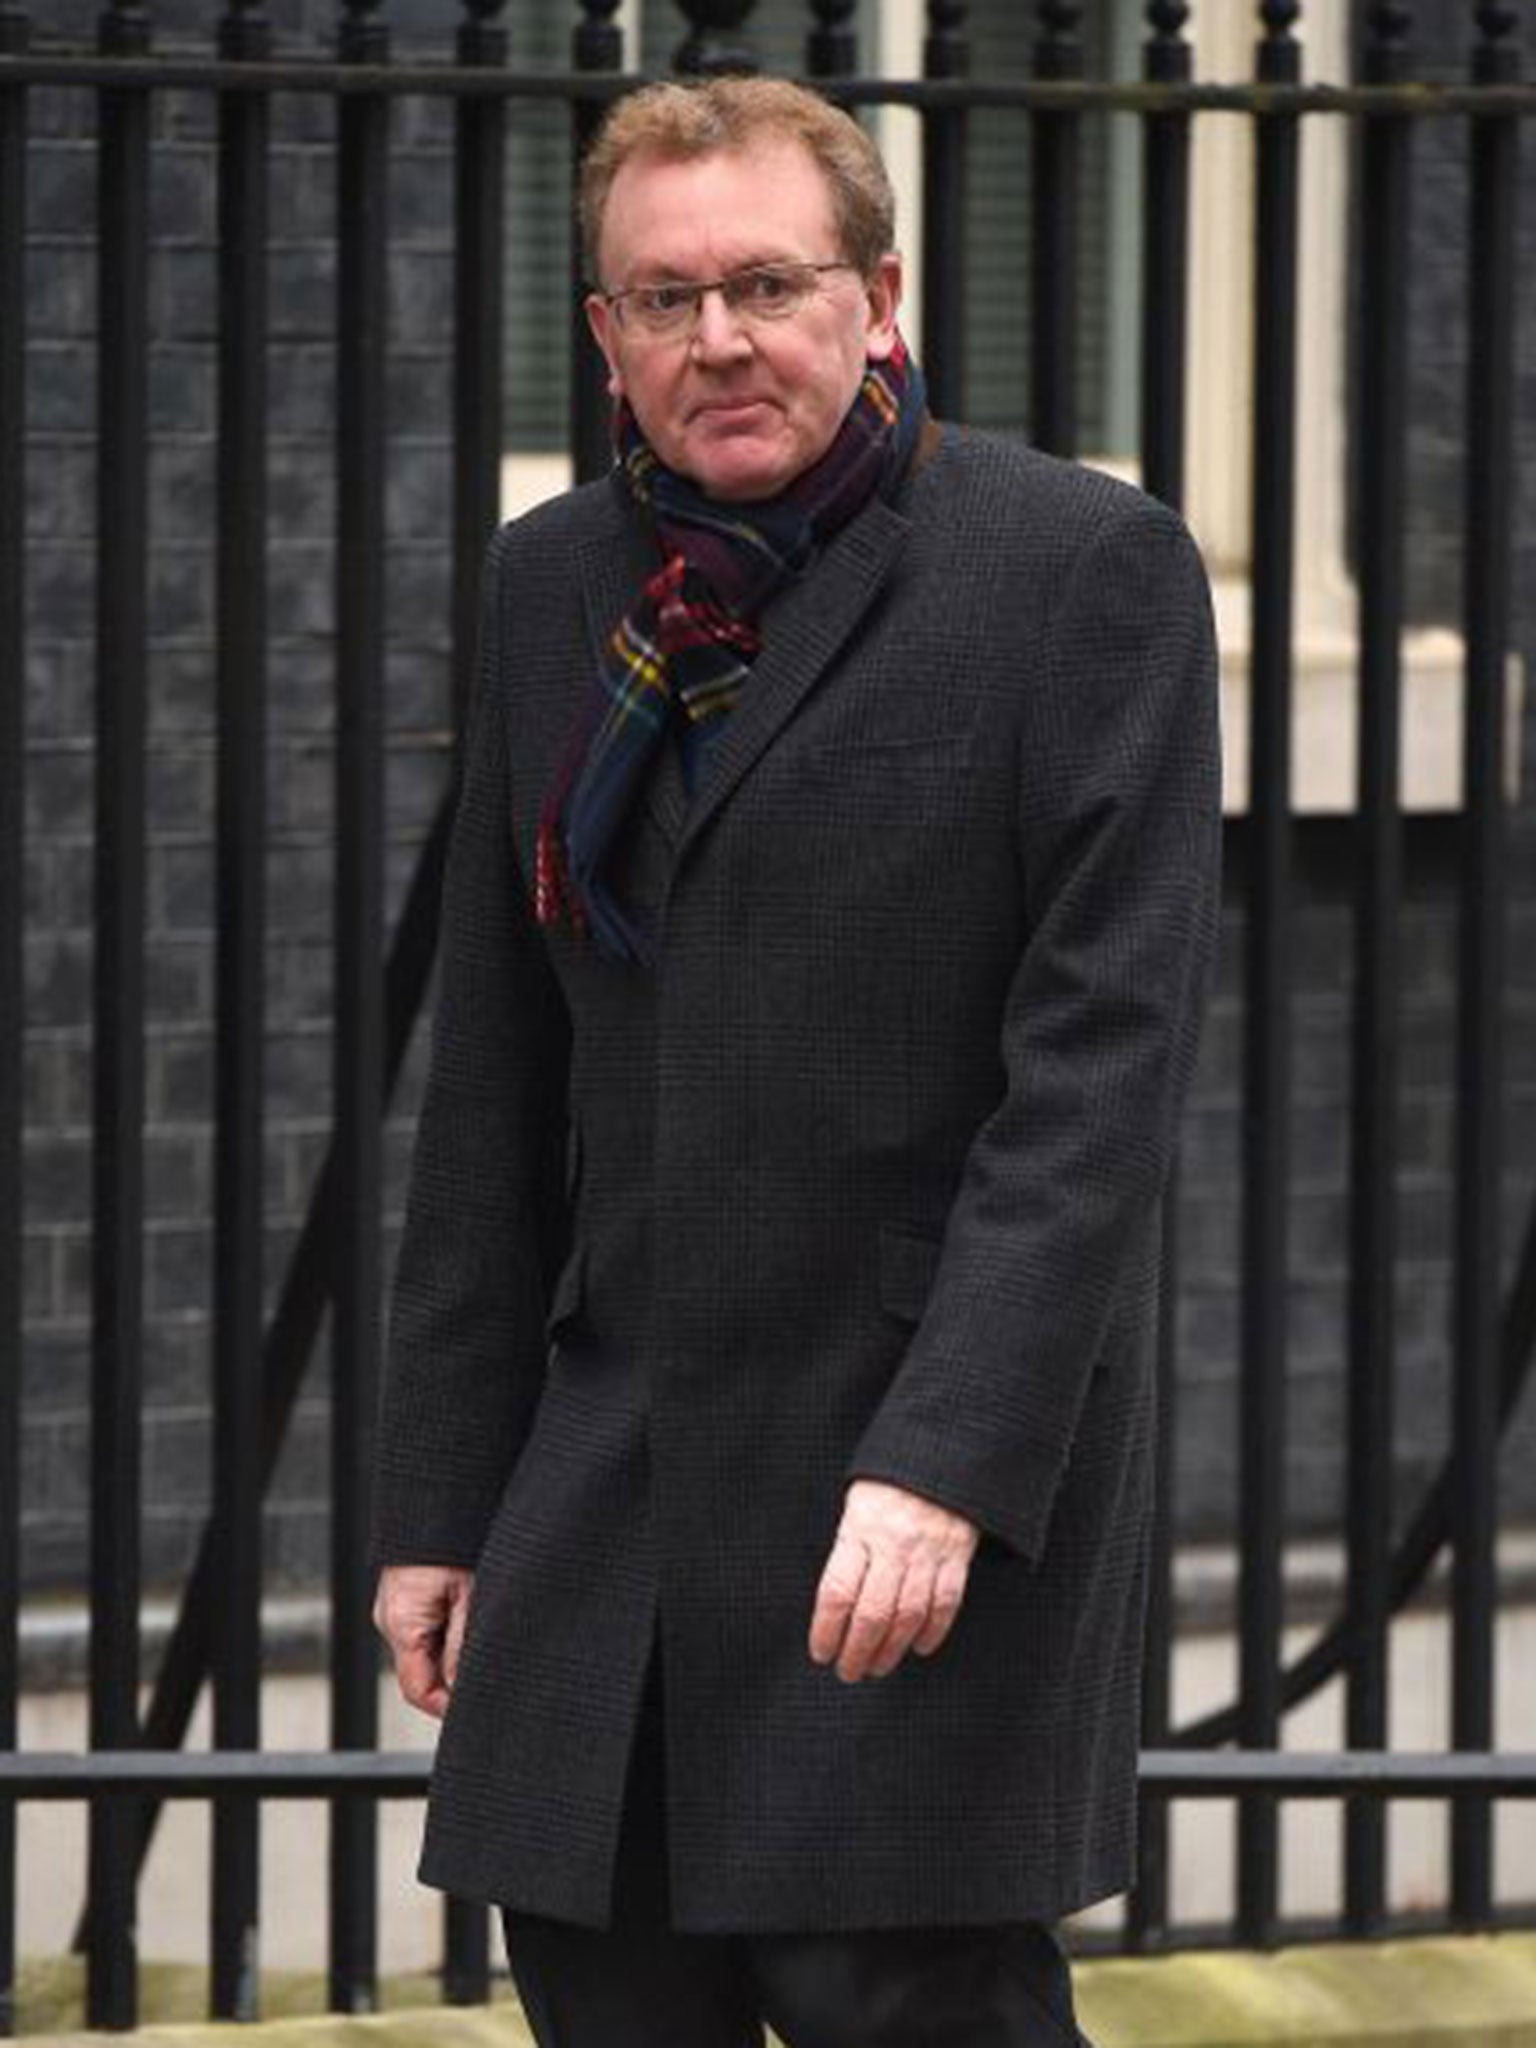 David Mundell will warn voters to be “very wary” of campaigners who play down the risks of the UK going it alone